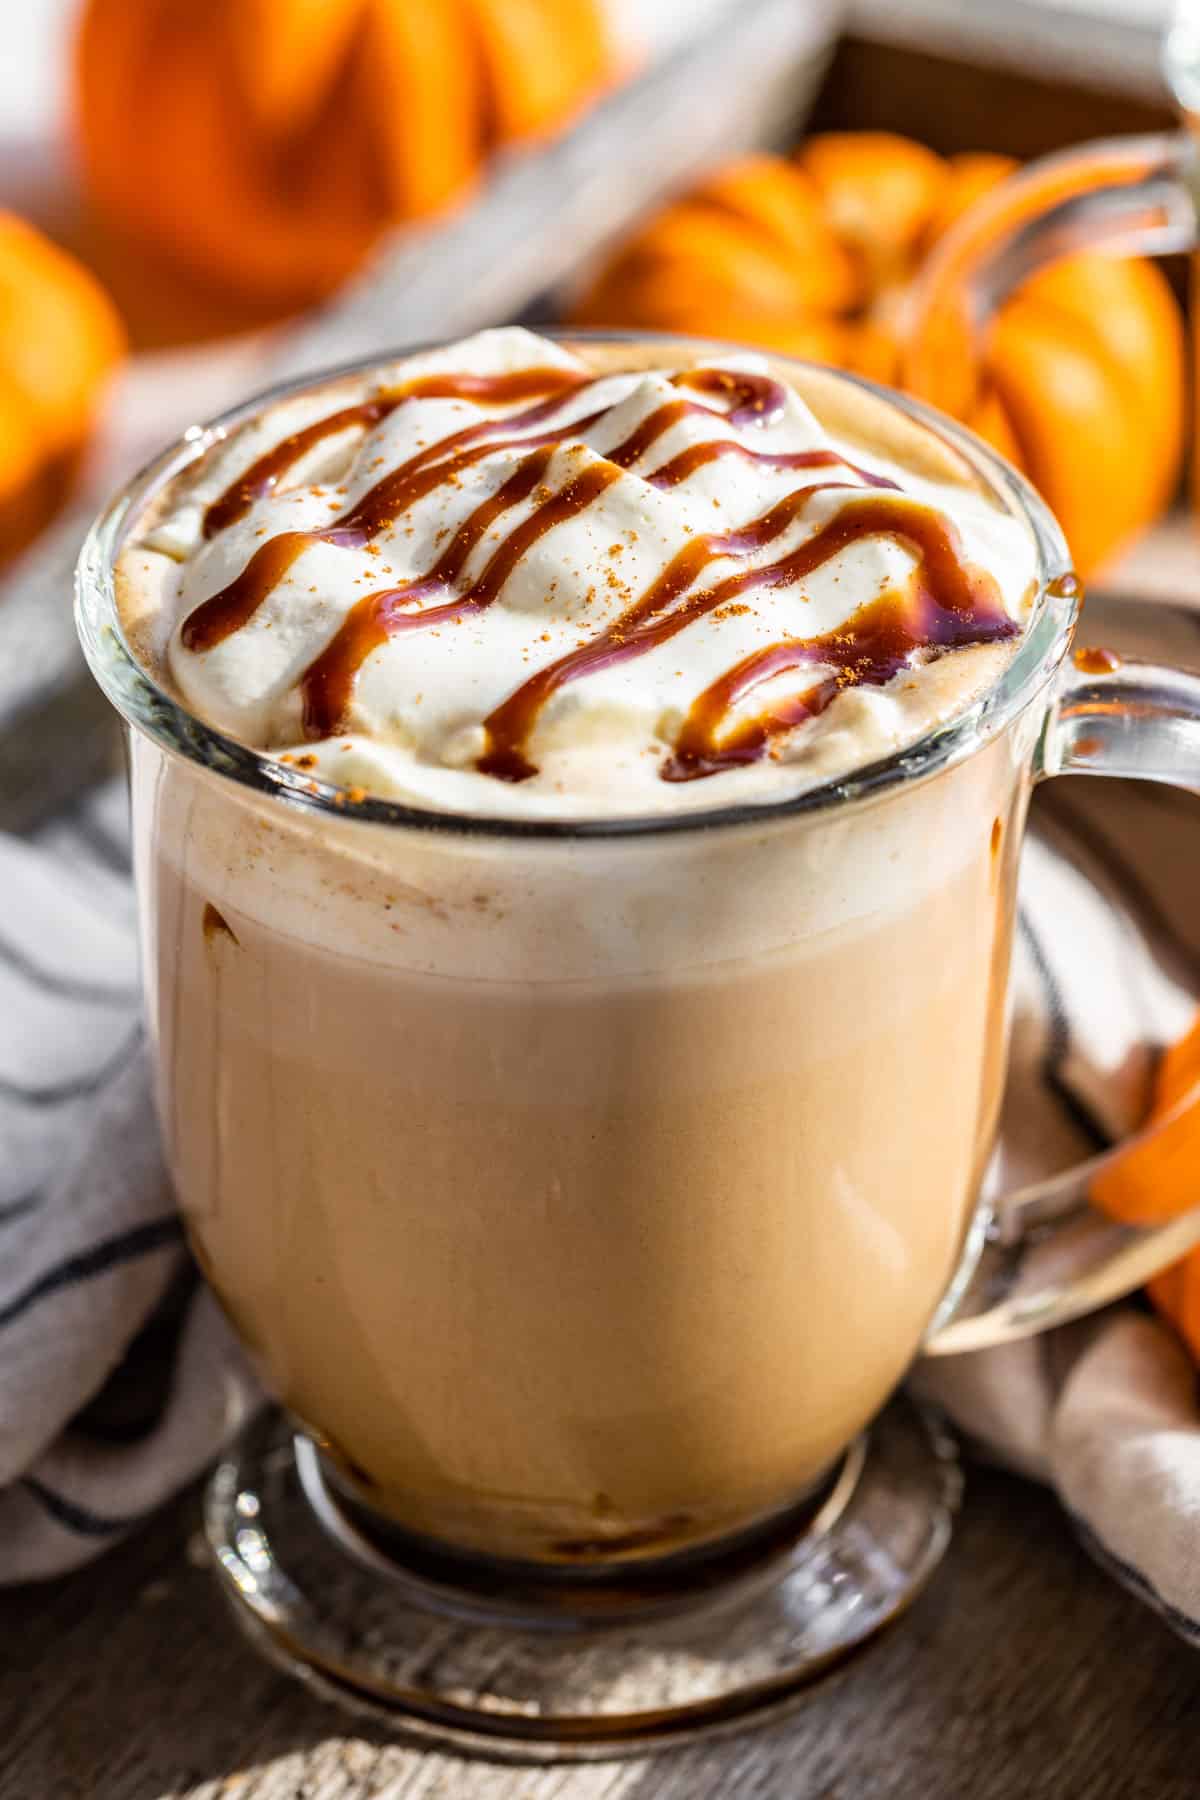 A glass mug filled with Pumpkin Chai Latte and topped with whipped cream and caramel sauce with pumpkins in the background.